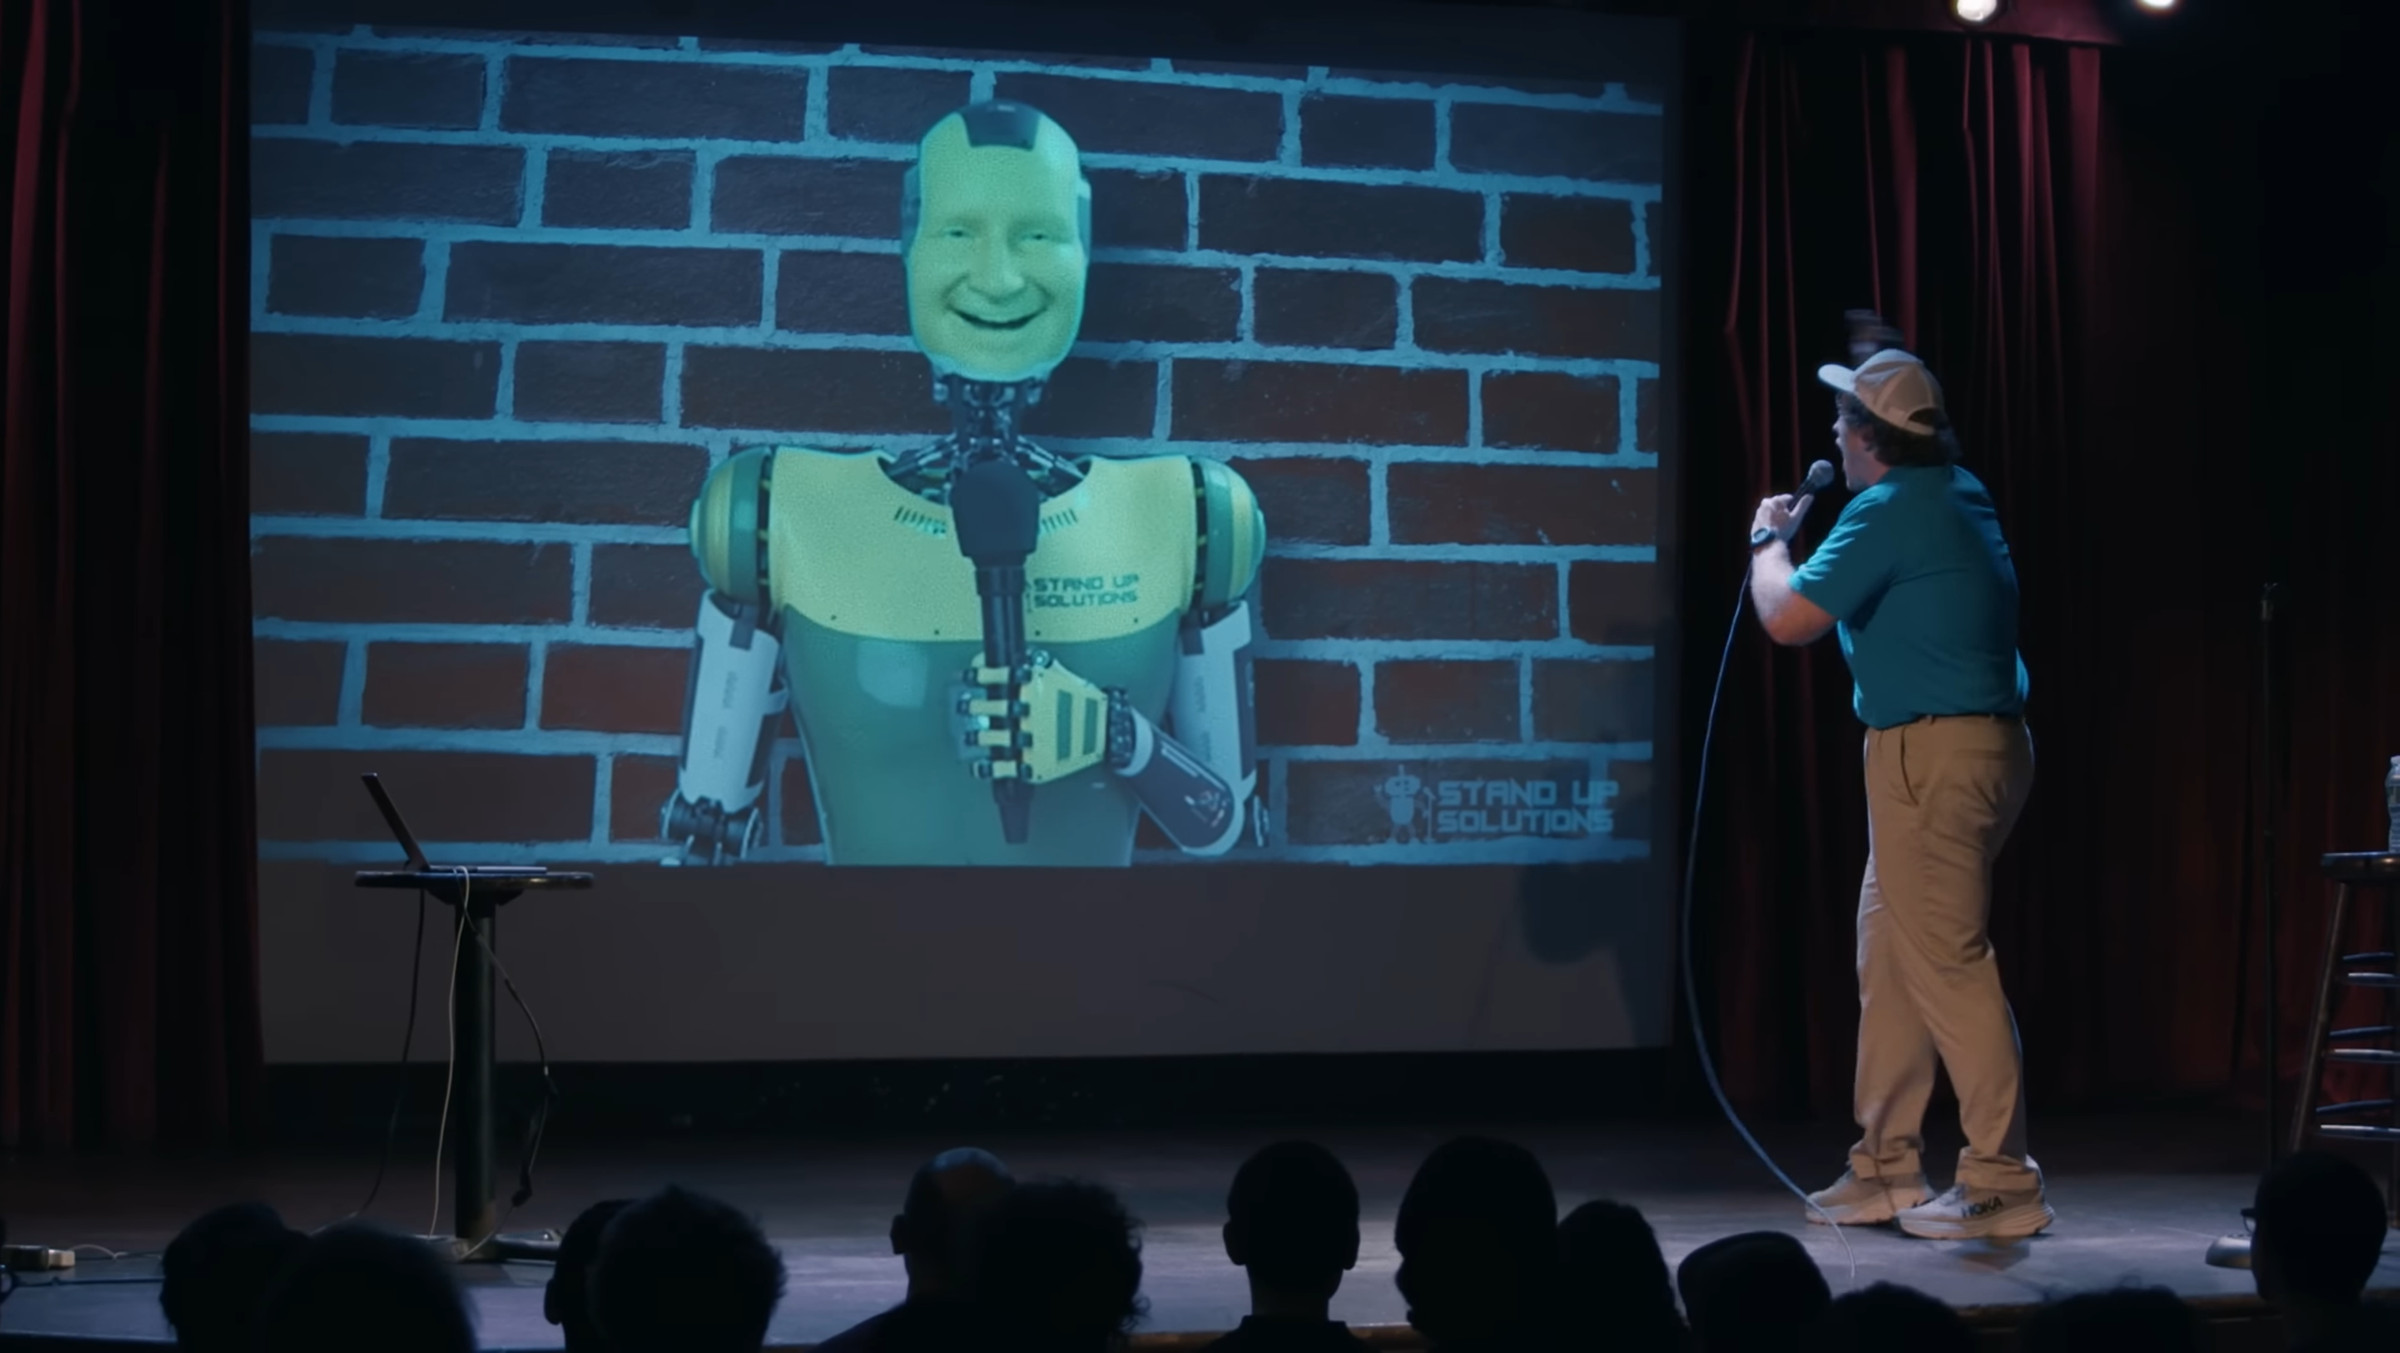 Comedian Conner O’Malley yelling at this AI standup robot on a screen